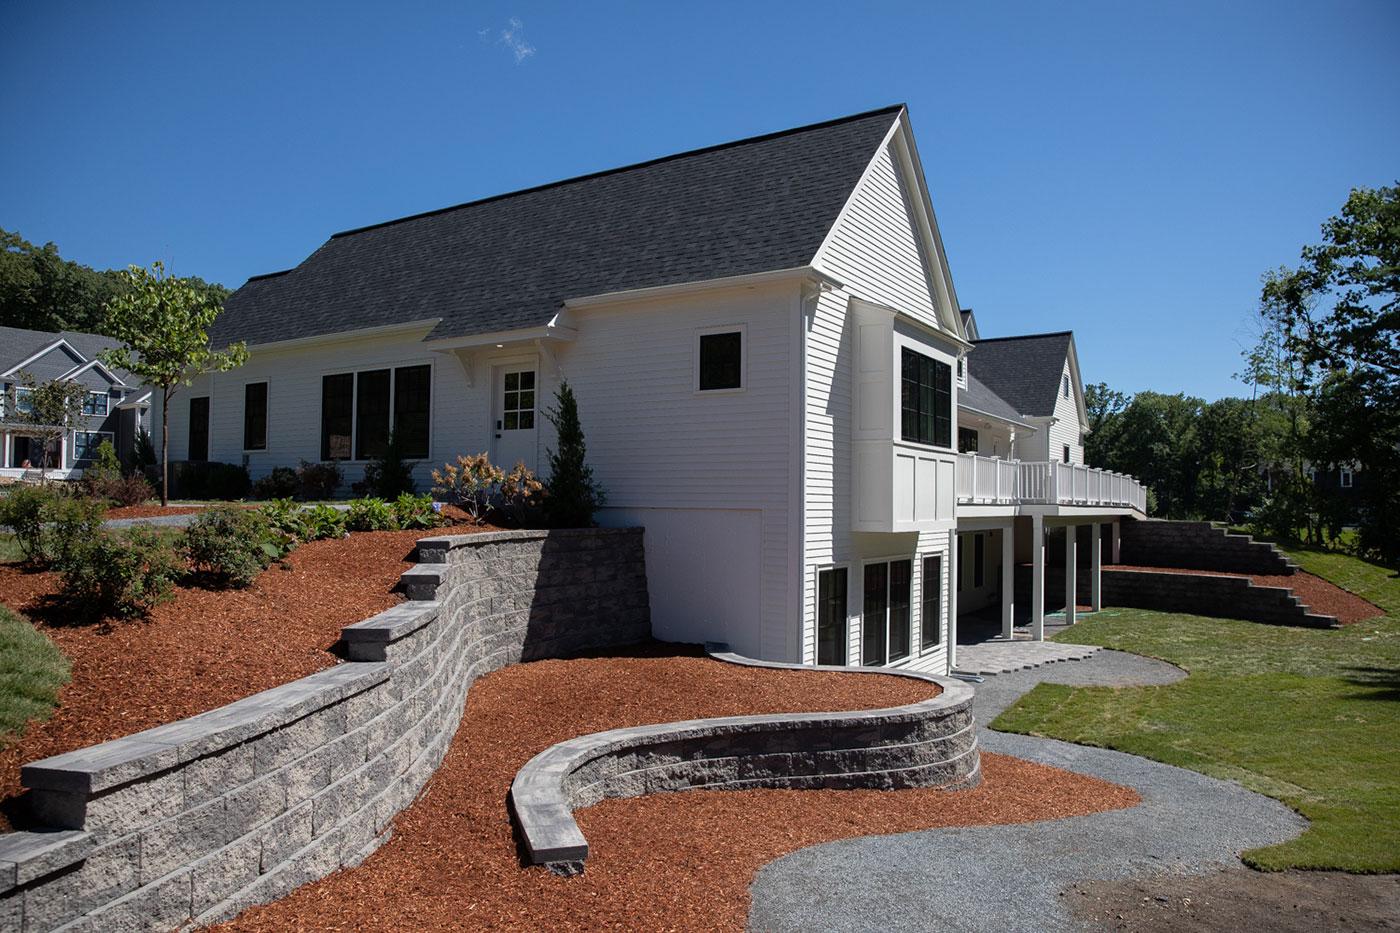 Side and backyard of a specially adapted smart home, part of the R.I.S.E. program at the Gary Sinise Foundation